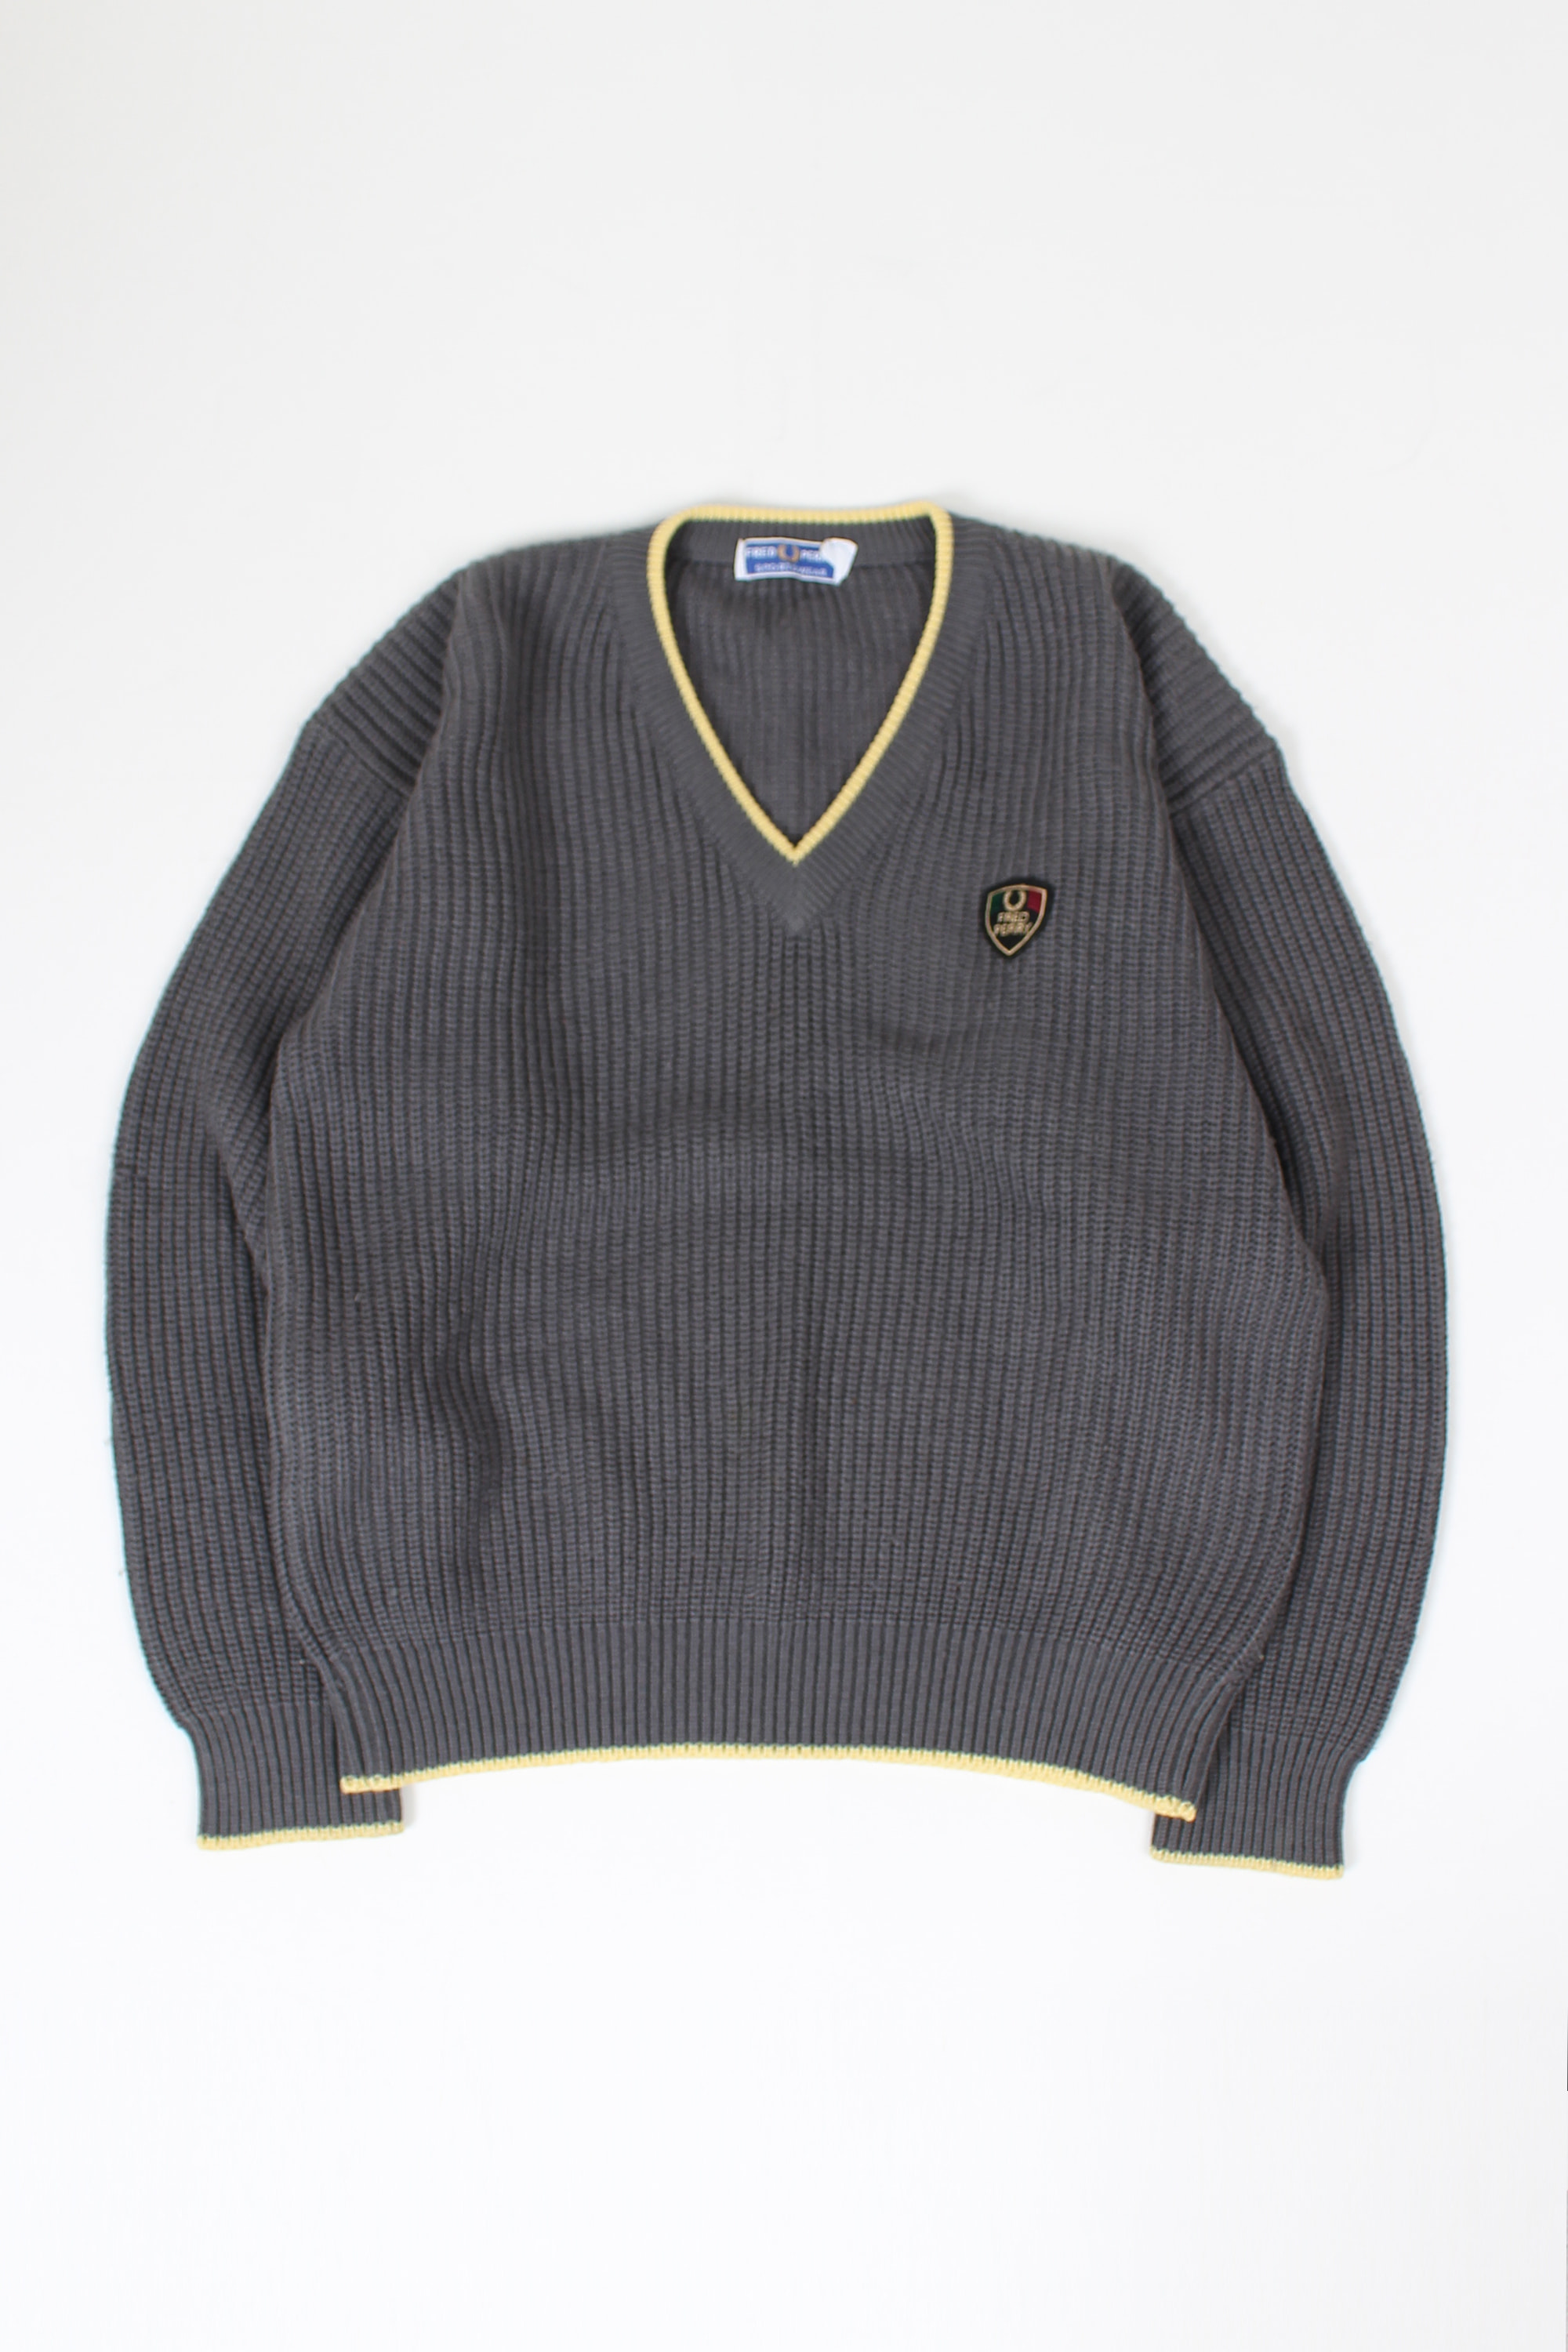 Fred Perry V neck knit